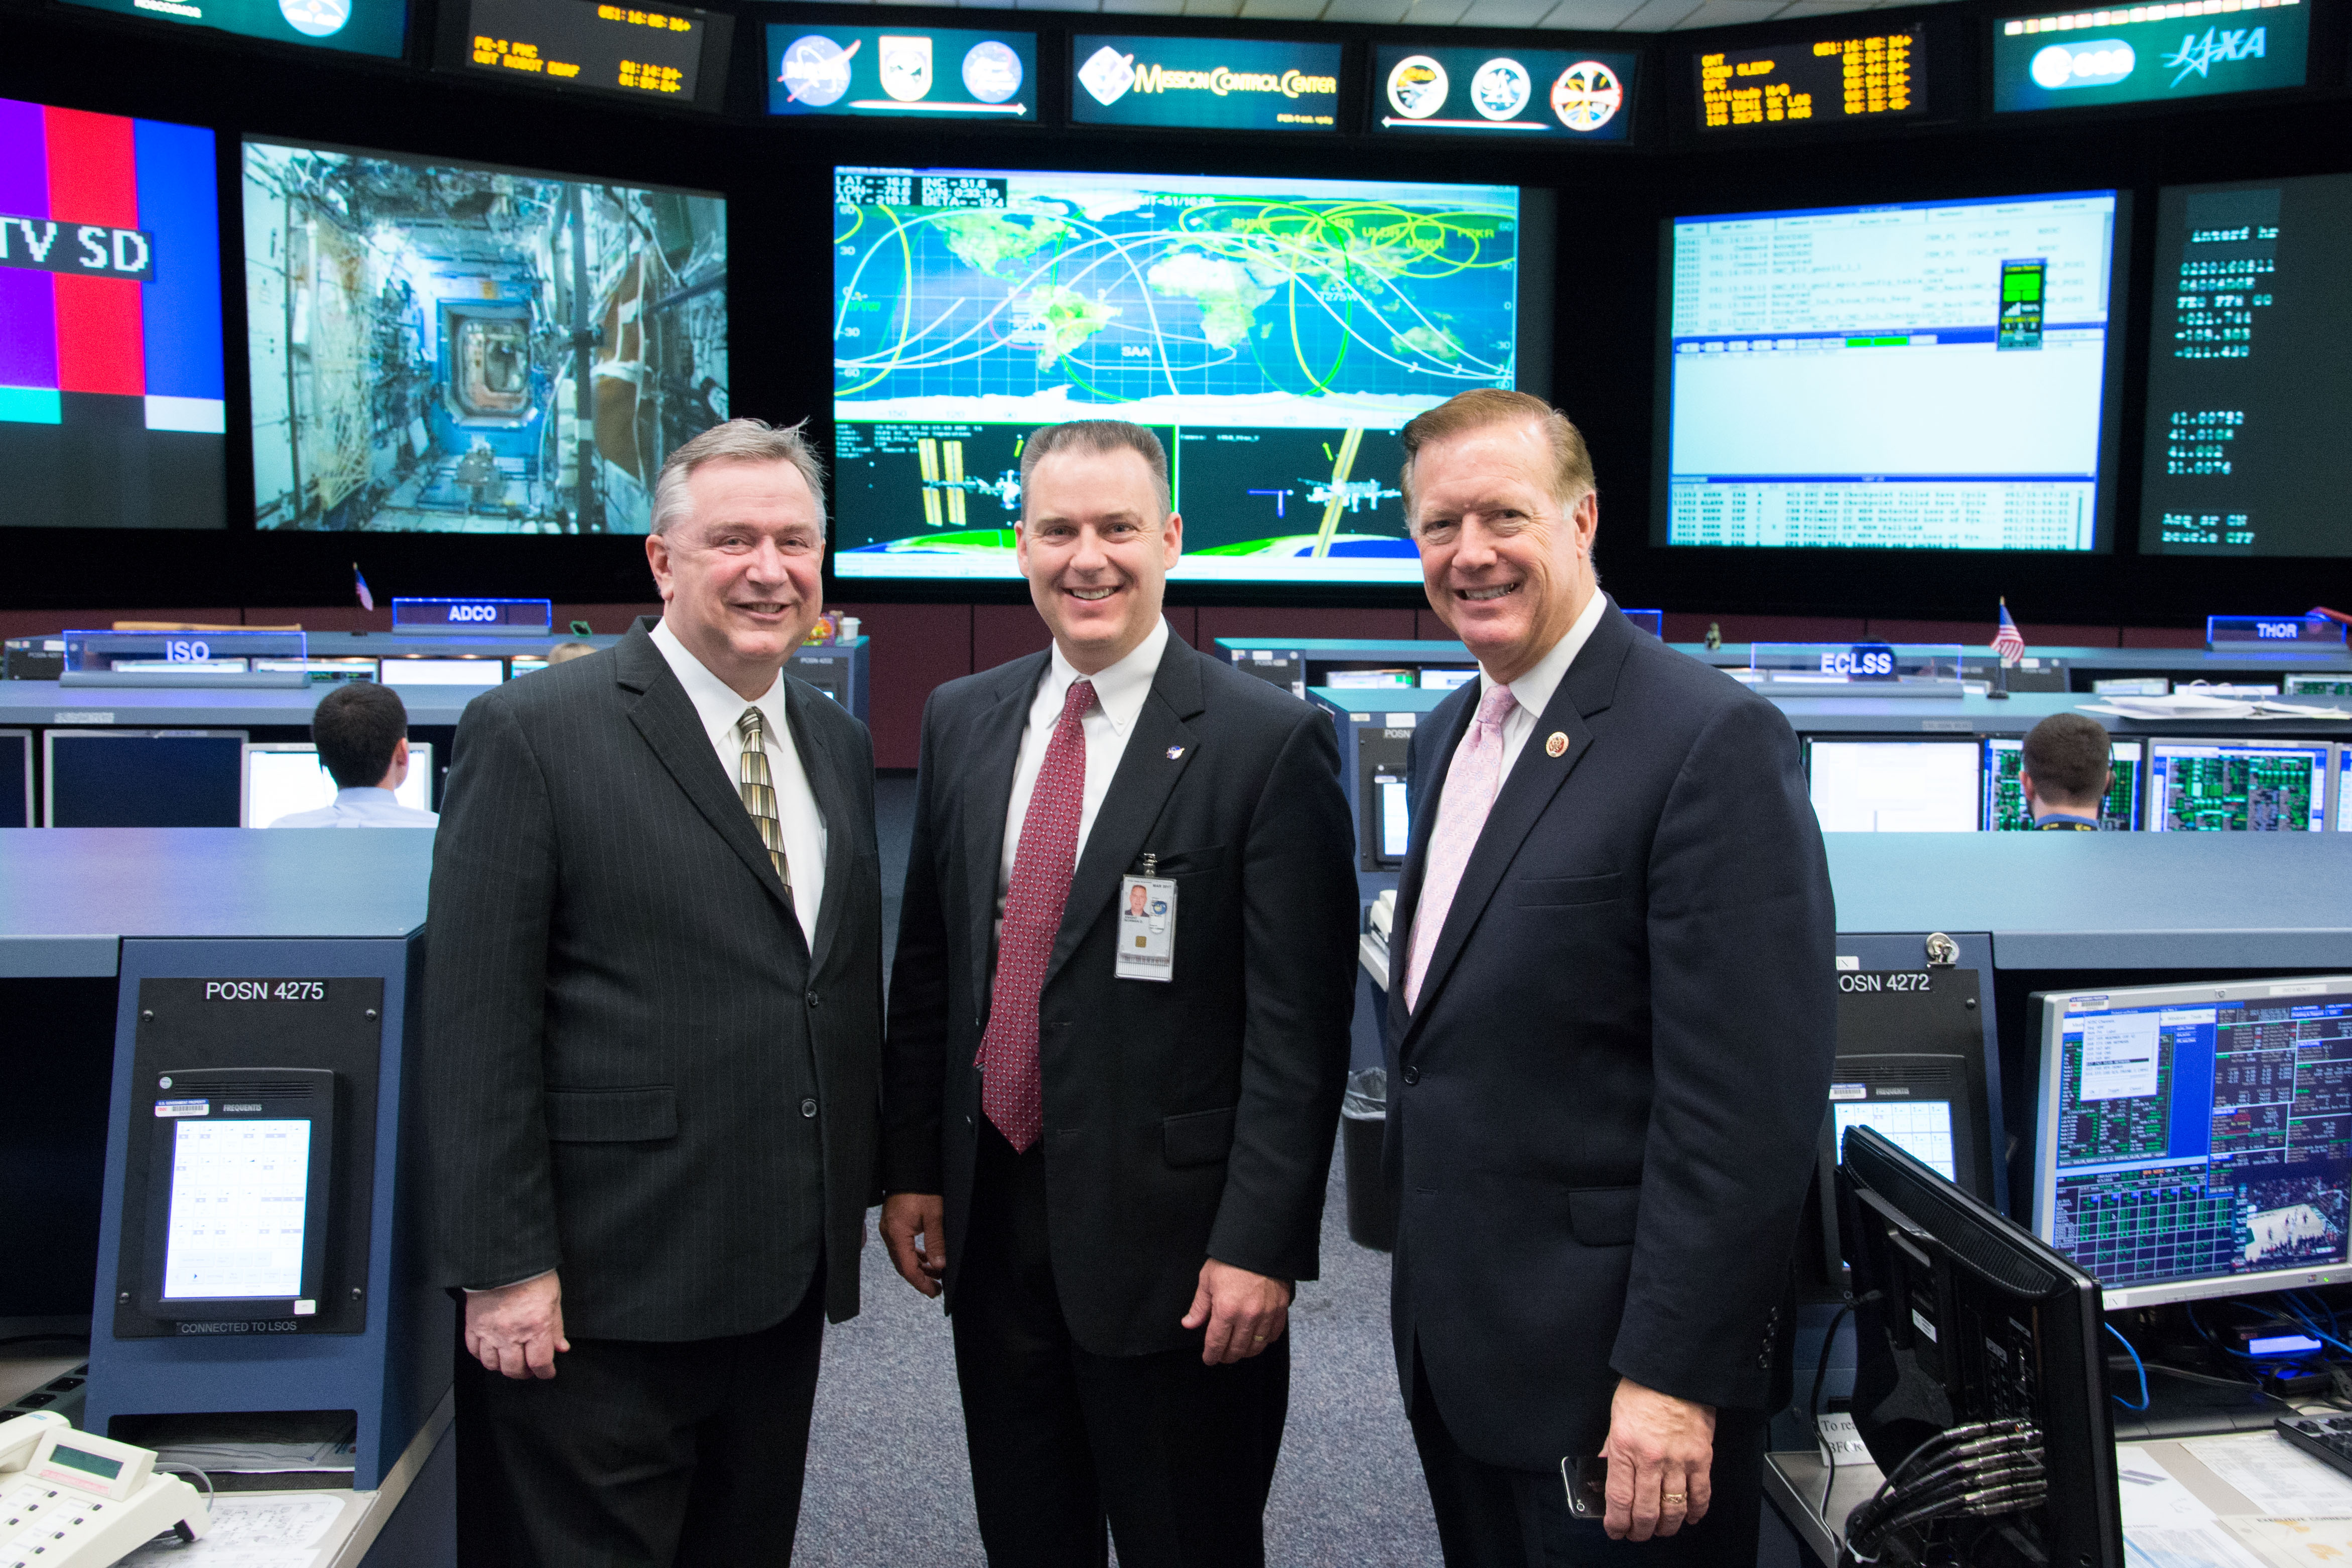 In the ISS Control Room at the Johnson Space Center